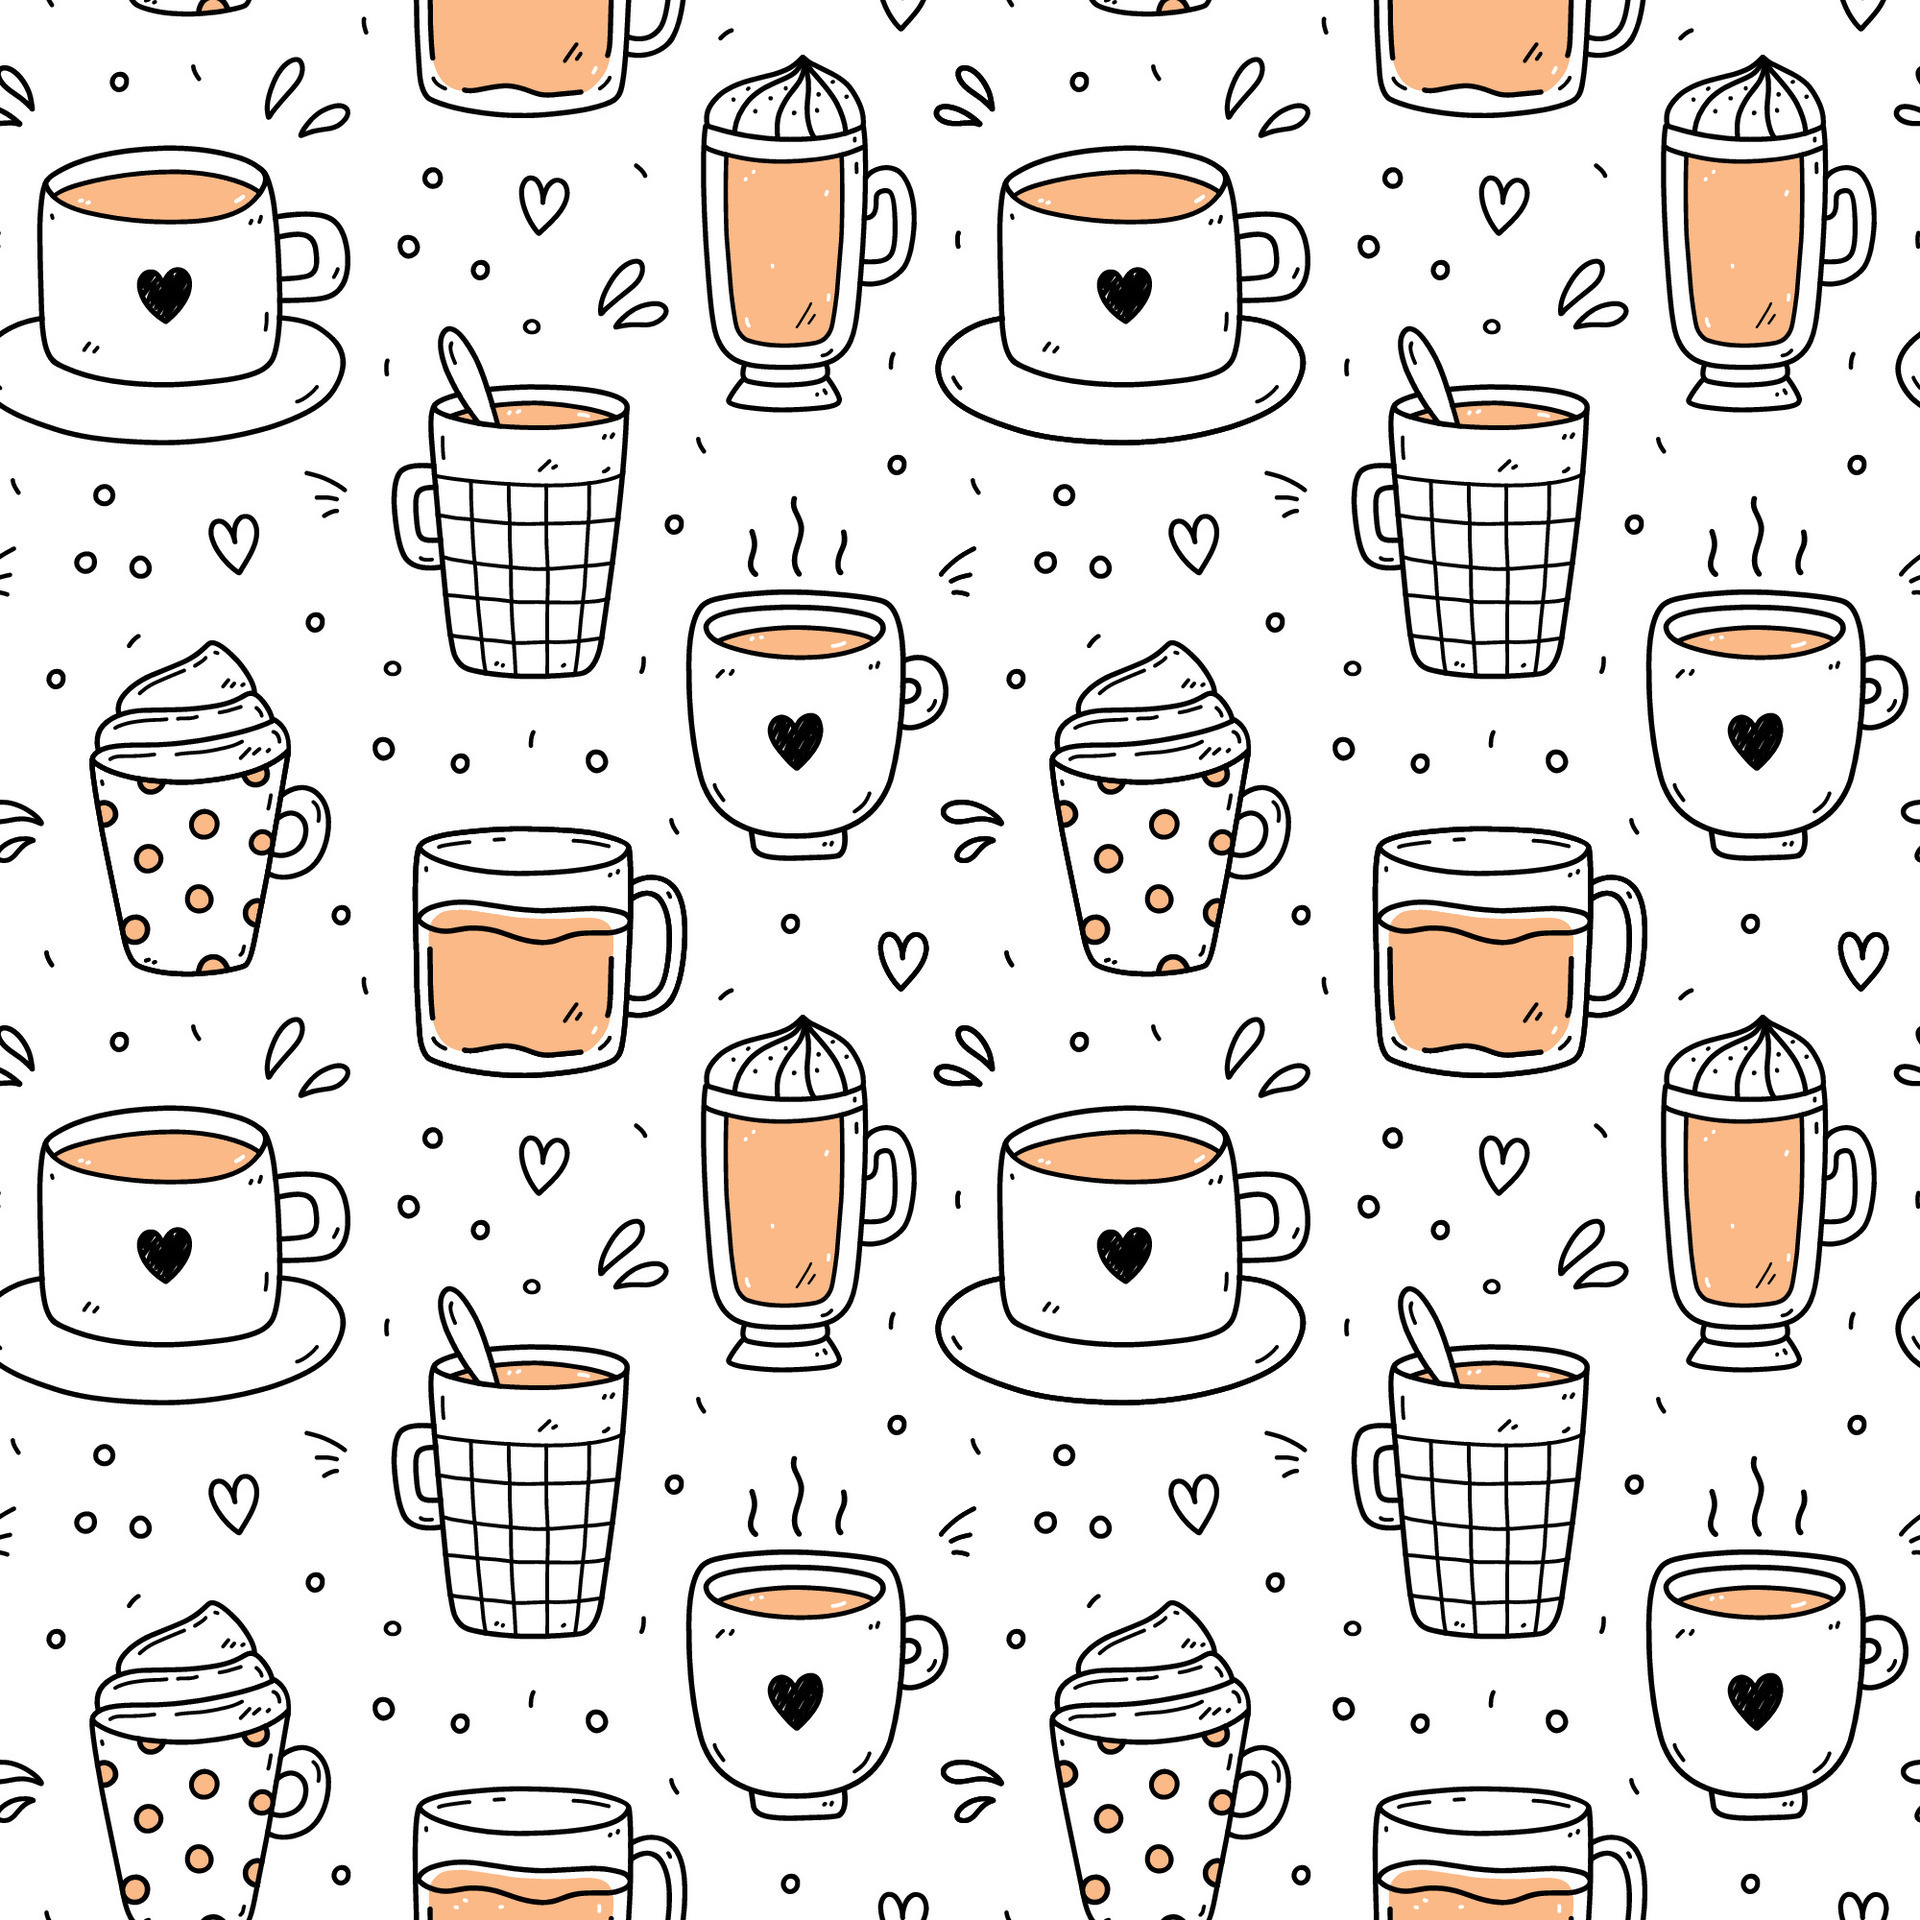 https://static.vecteezy.com/system/resources/previews/026/787/200/original/cute-seamless-pattern-with-coffee-cups-americano-cappuccino-mocha-latte-hand-drawn-illustration-in-doodle-style-perfect-for-print-menu-wrapping-paper-wallpaper-various-designs-vector.jpg